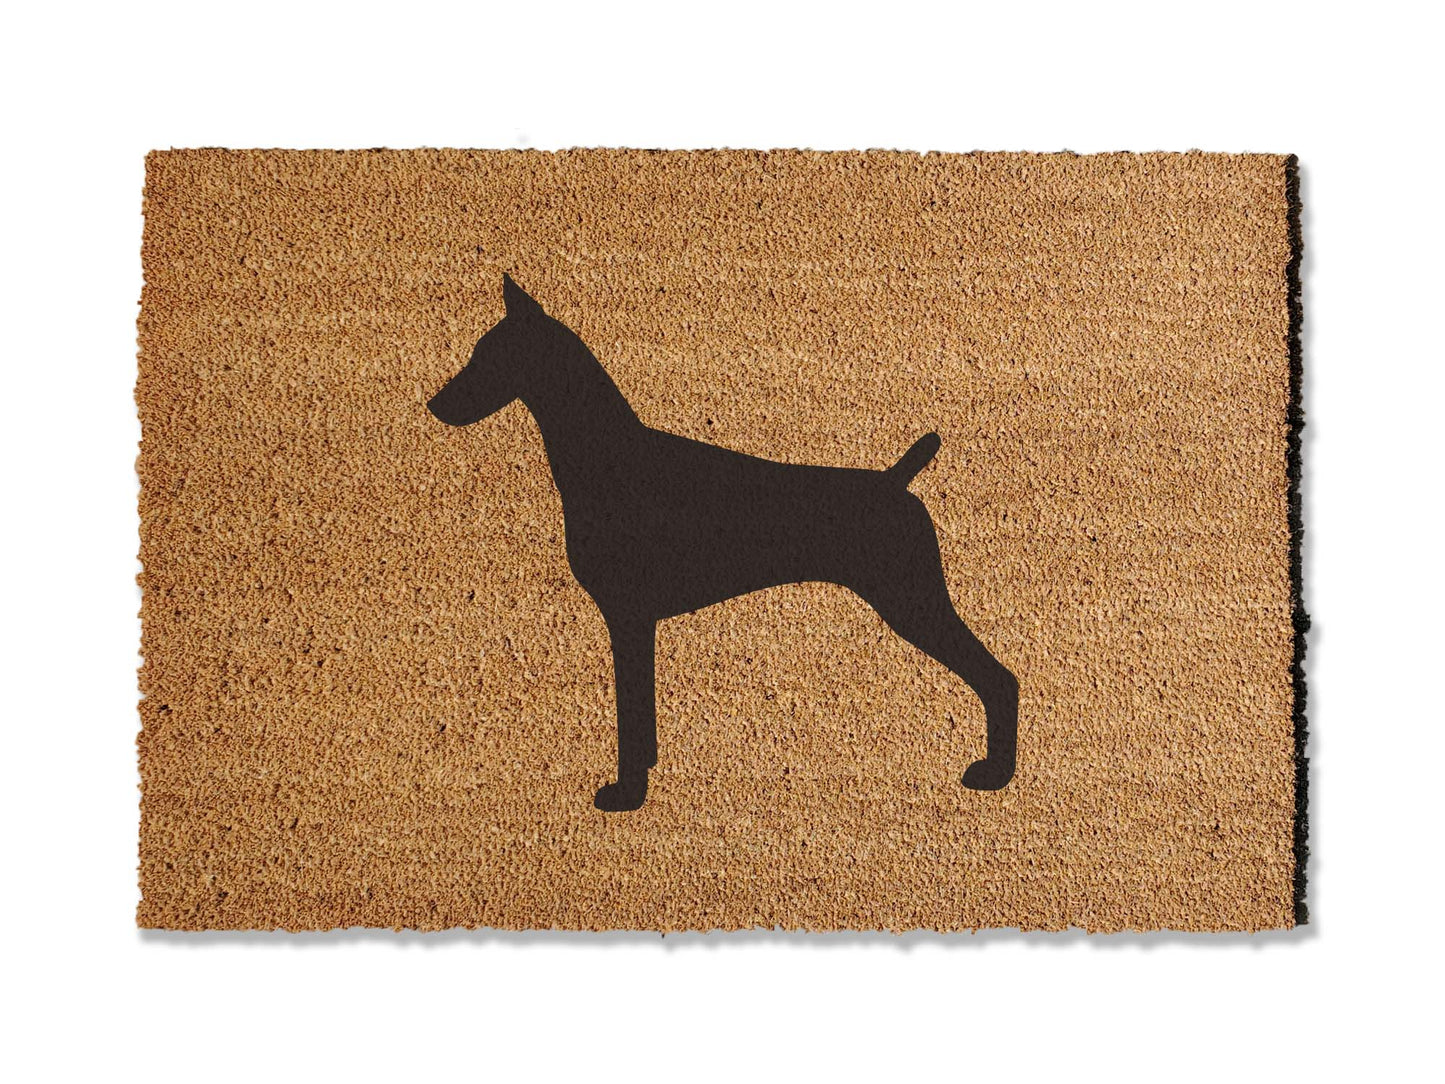 Elevate your entryway with our charming coir welcome doormat featuring an adorable Doberman Pinscher Dog design. Available in multiple sizes, it's the perfect gift for dog lovers, adding a delightful touch to your home's first impression.